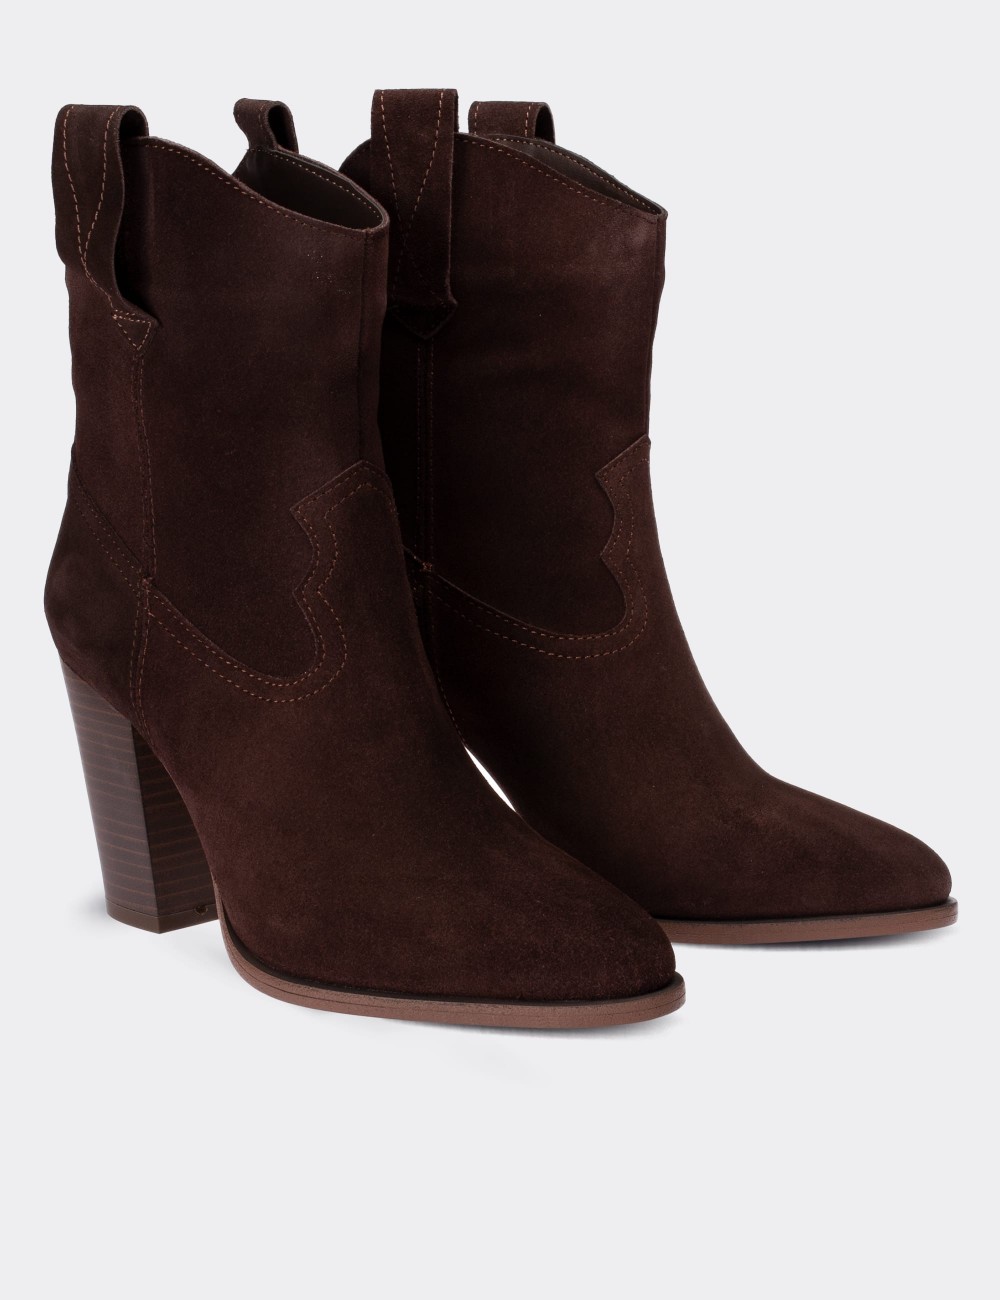 Brown Suede Leather  Boots - E4460ZKHVC01